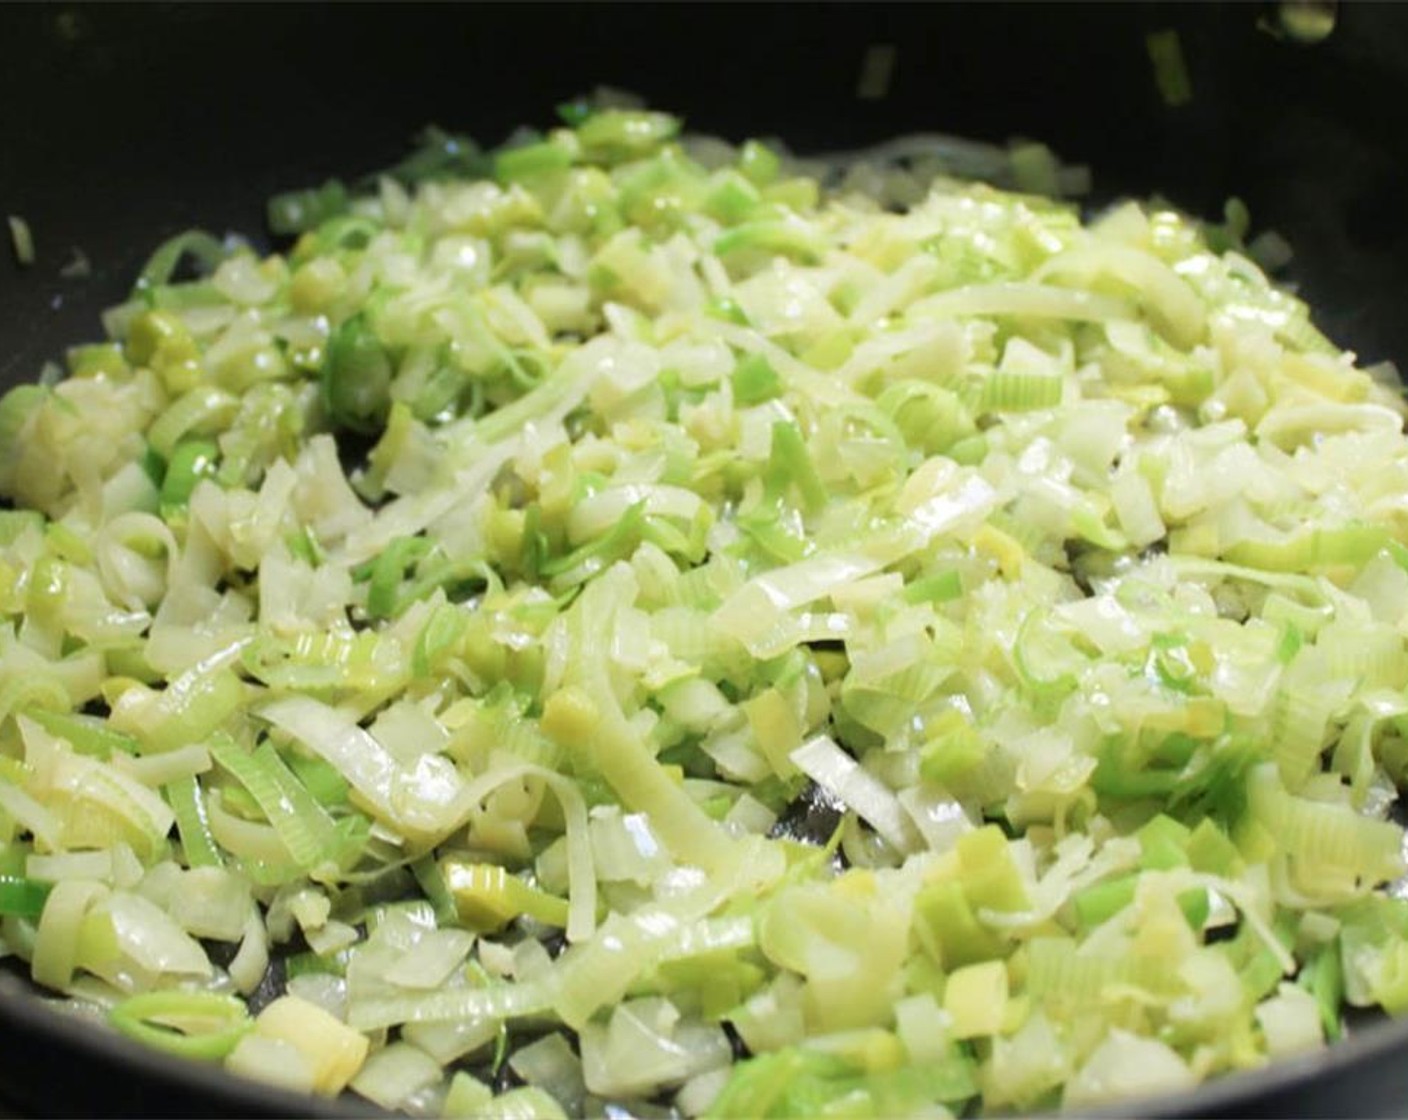 step 10 Heat the Olive Oil (1 1/2 Tbsp) in a large sauté pan over medium heat. When hot, add the leeks, onions and garlic and cook until soft, about 5 minutes.